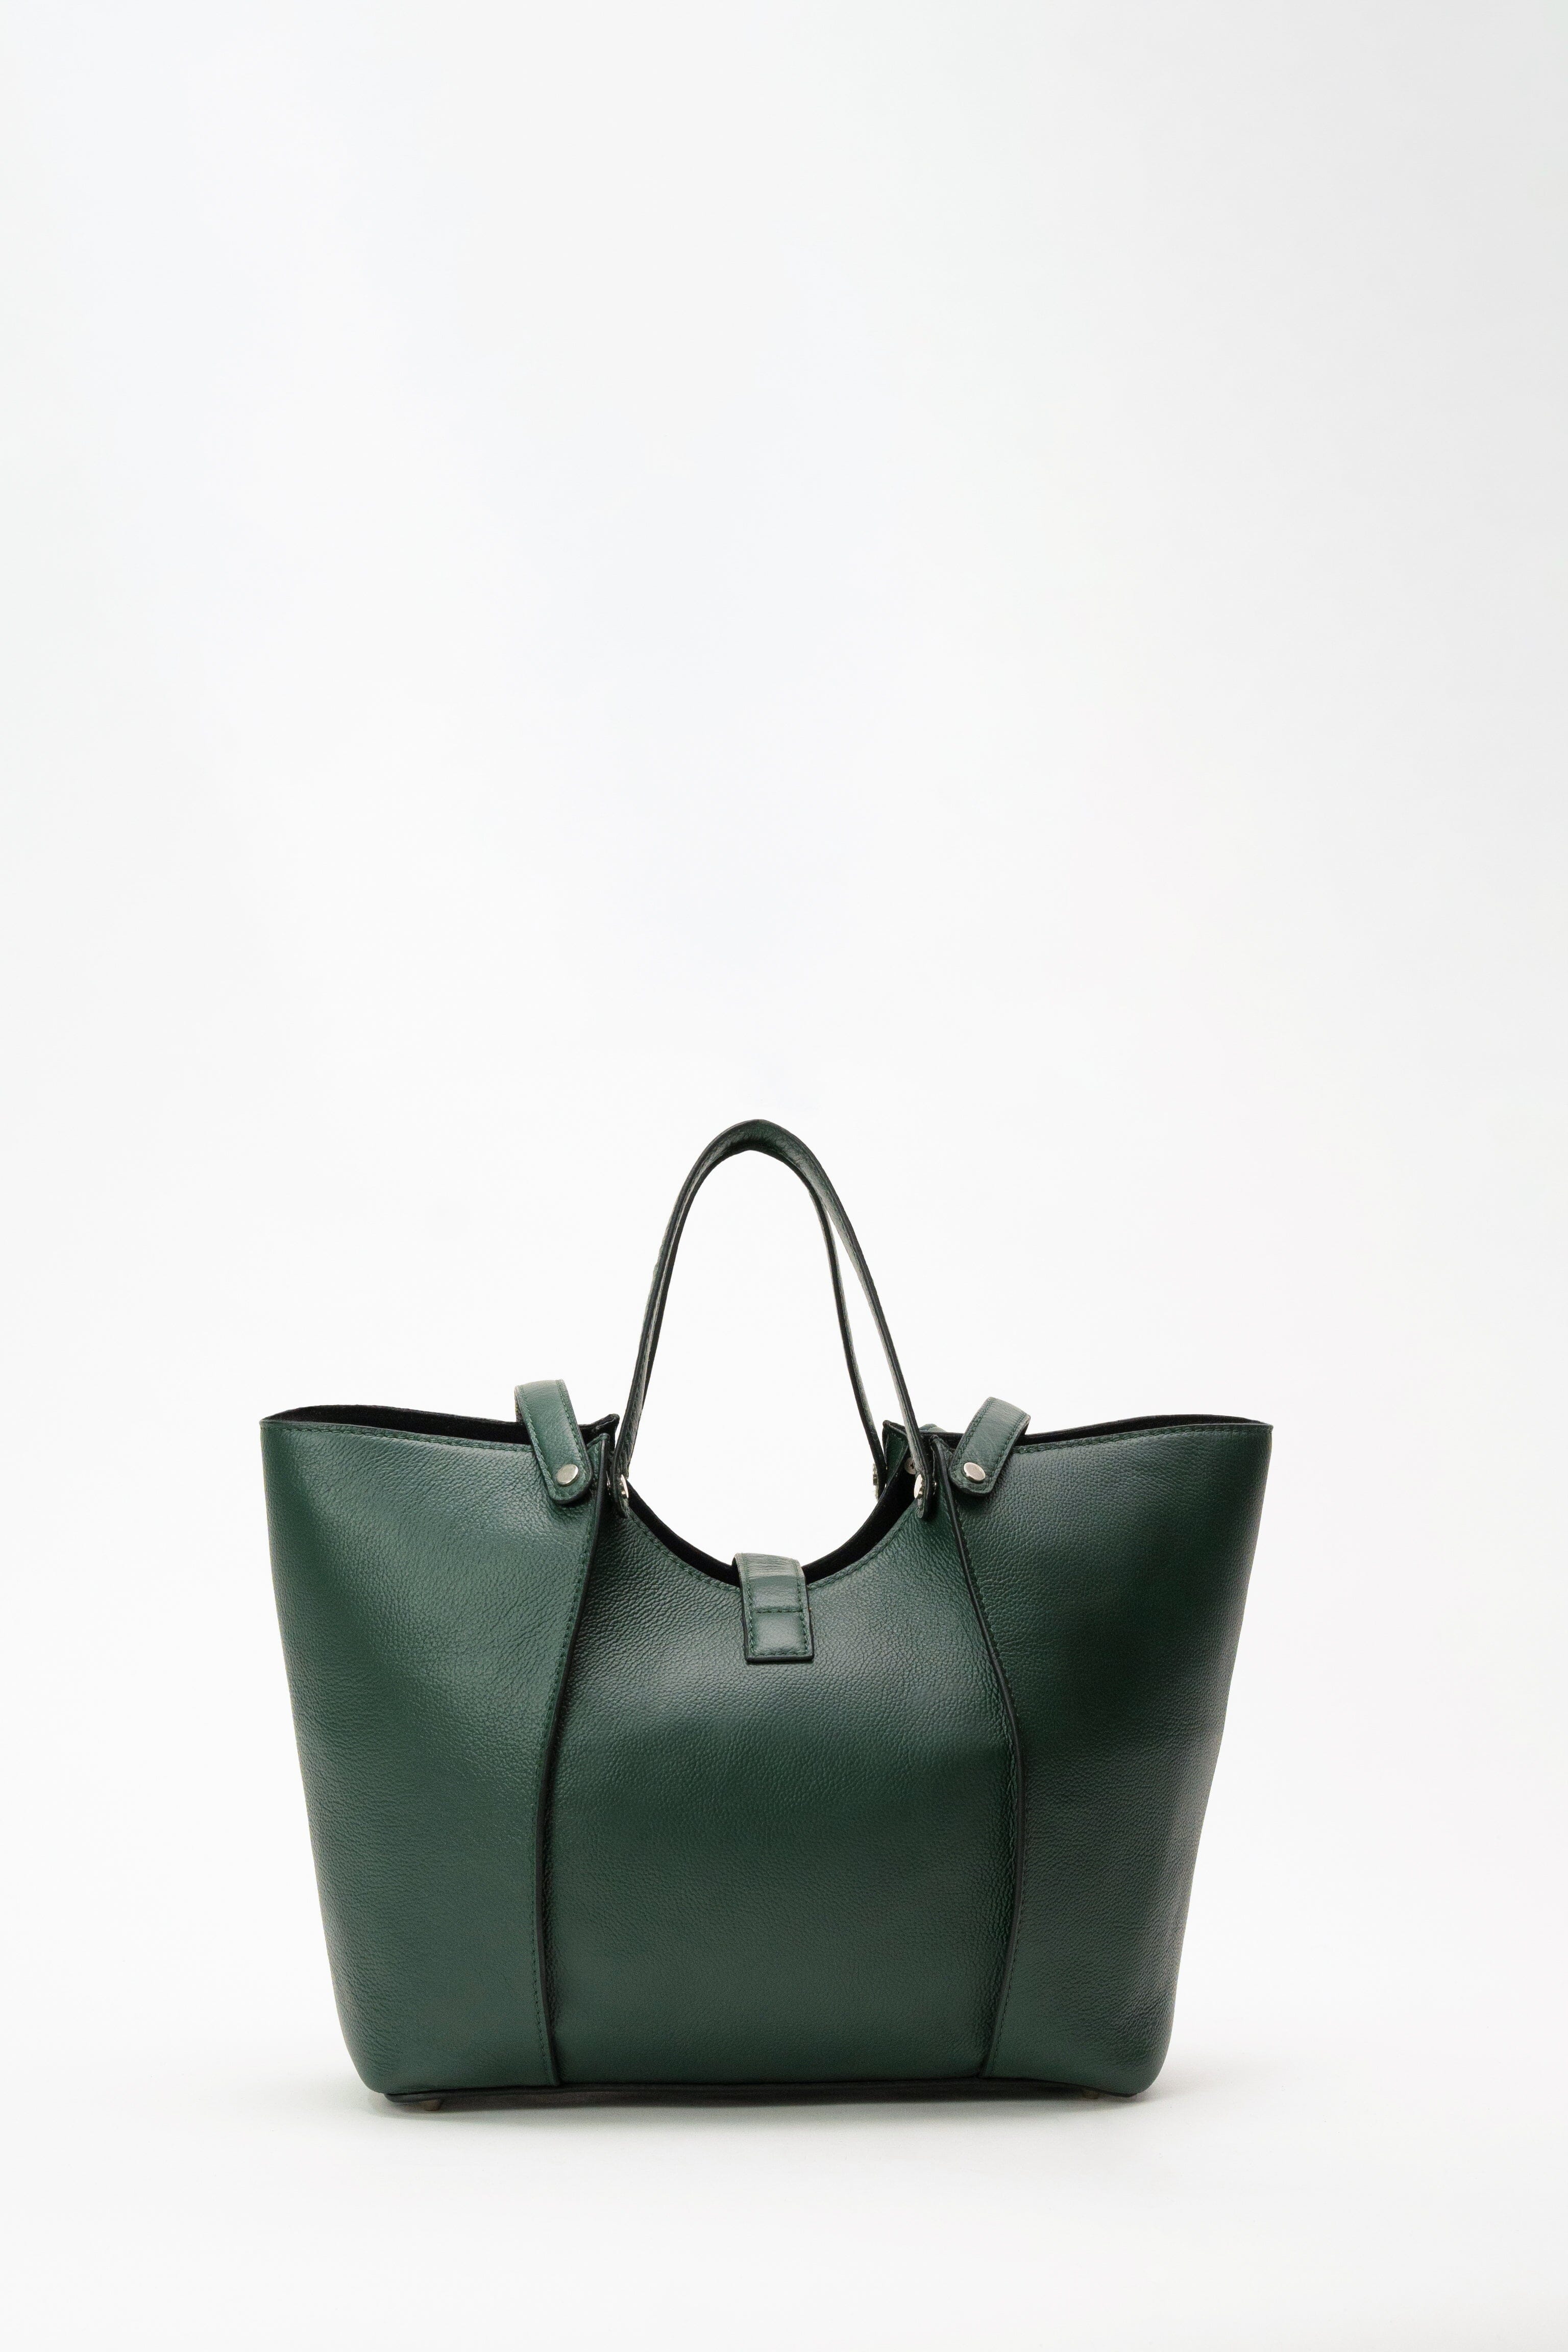 Madison Tote in Jade